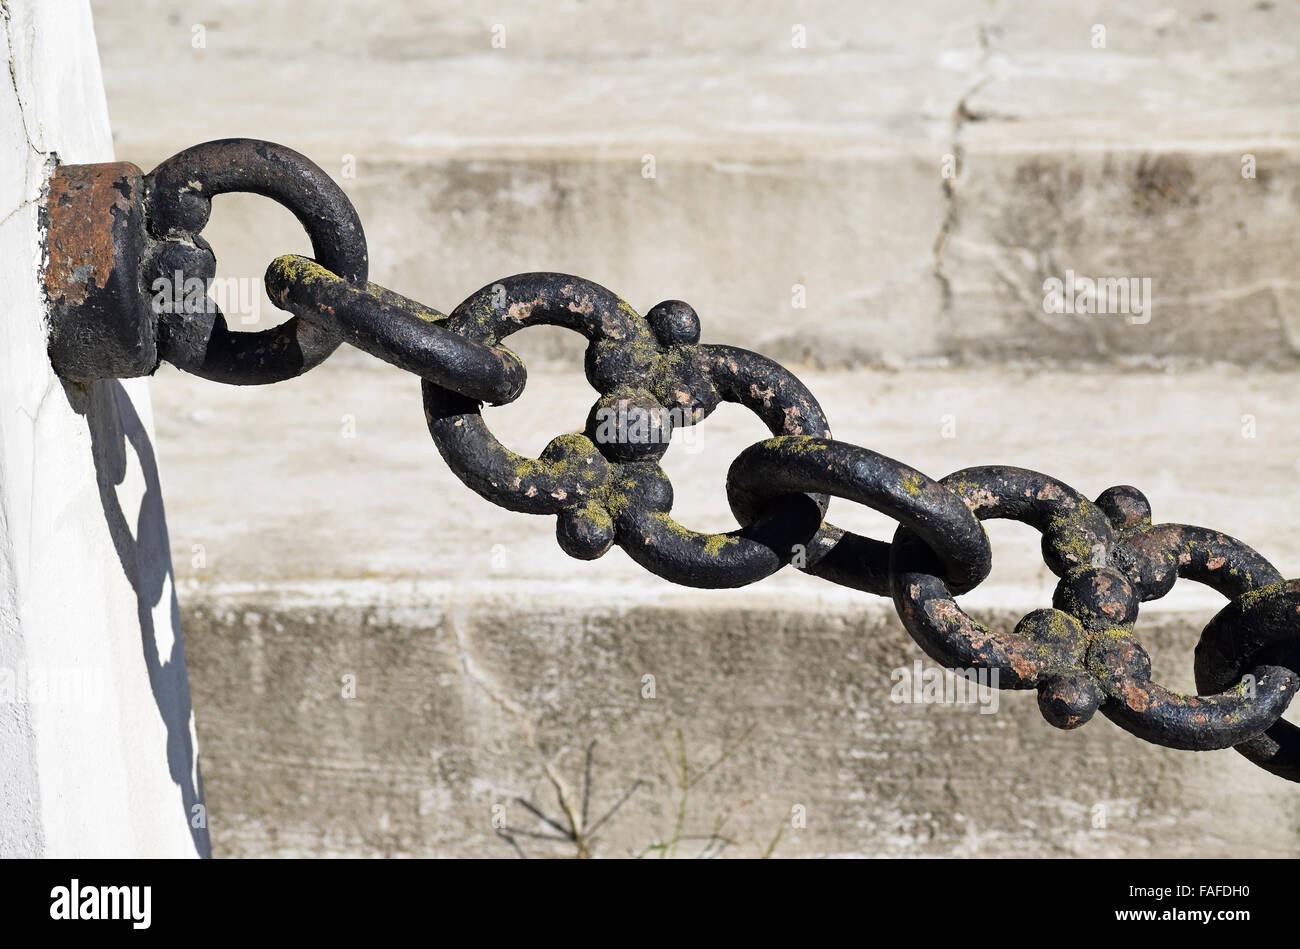 https://c8.alamy.com/comp/FAFDH0/iron-chain-links-in-front-of-a-concrete-wall-FAFDH0.jpg